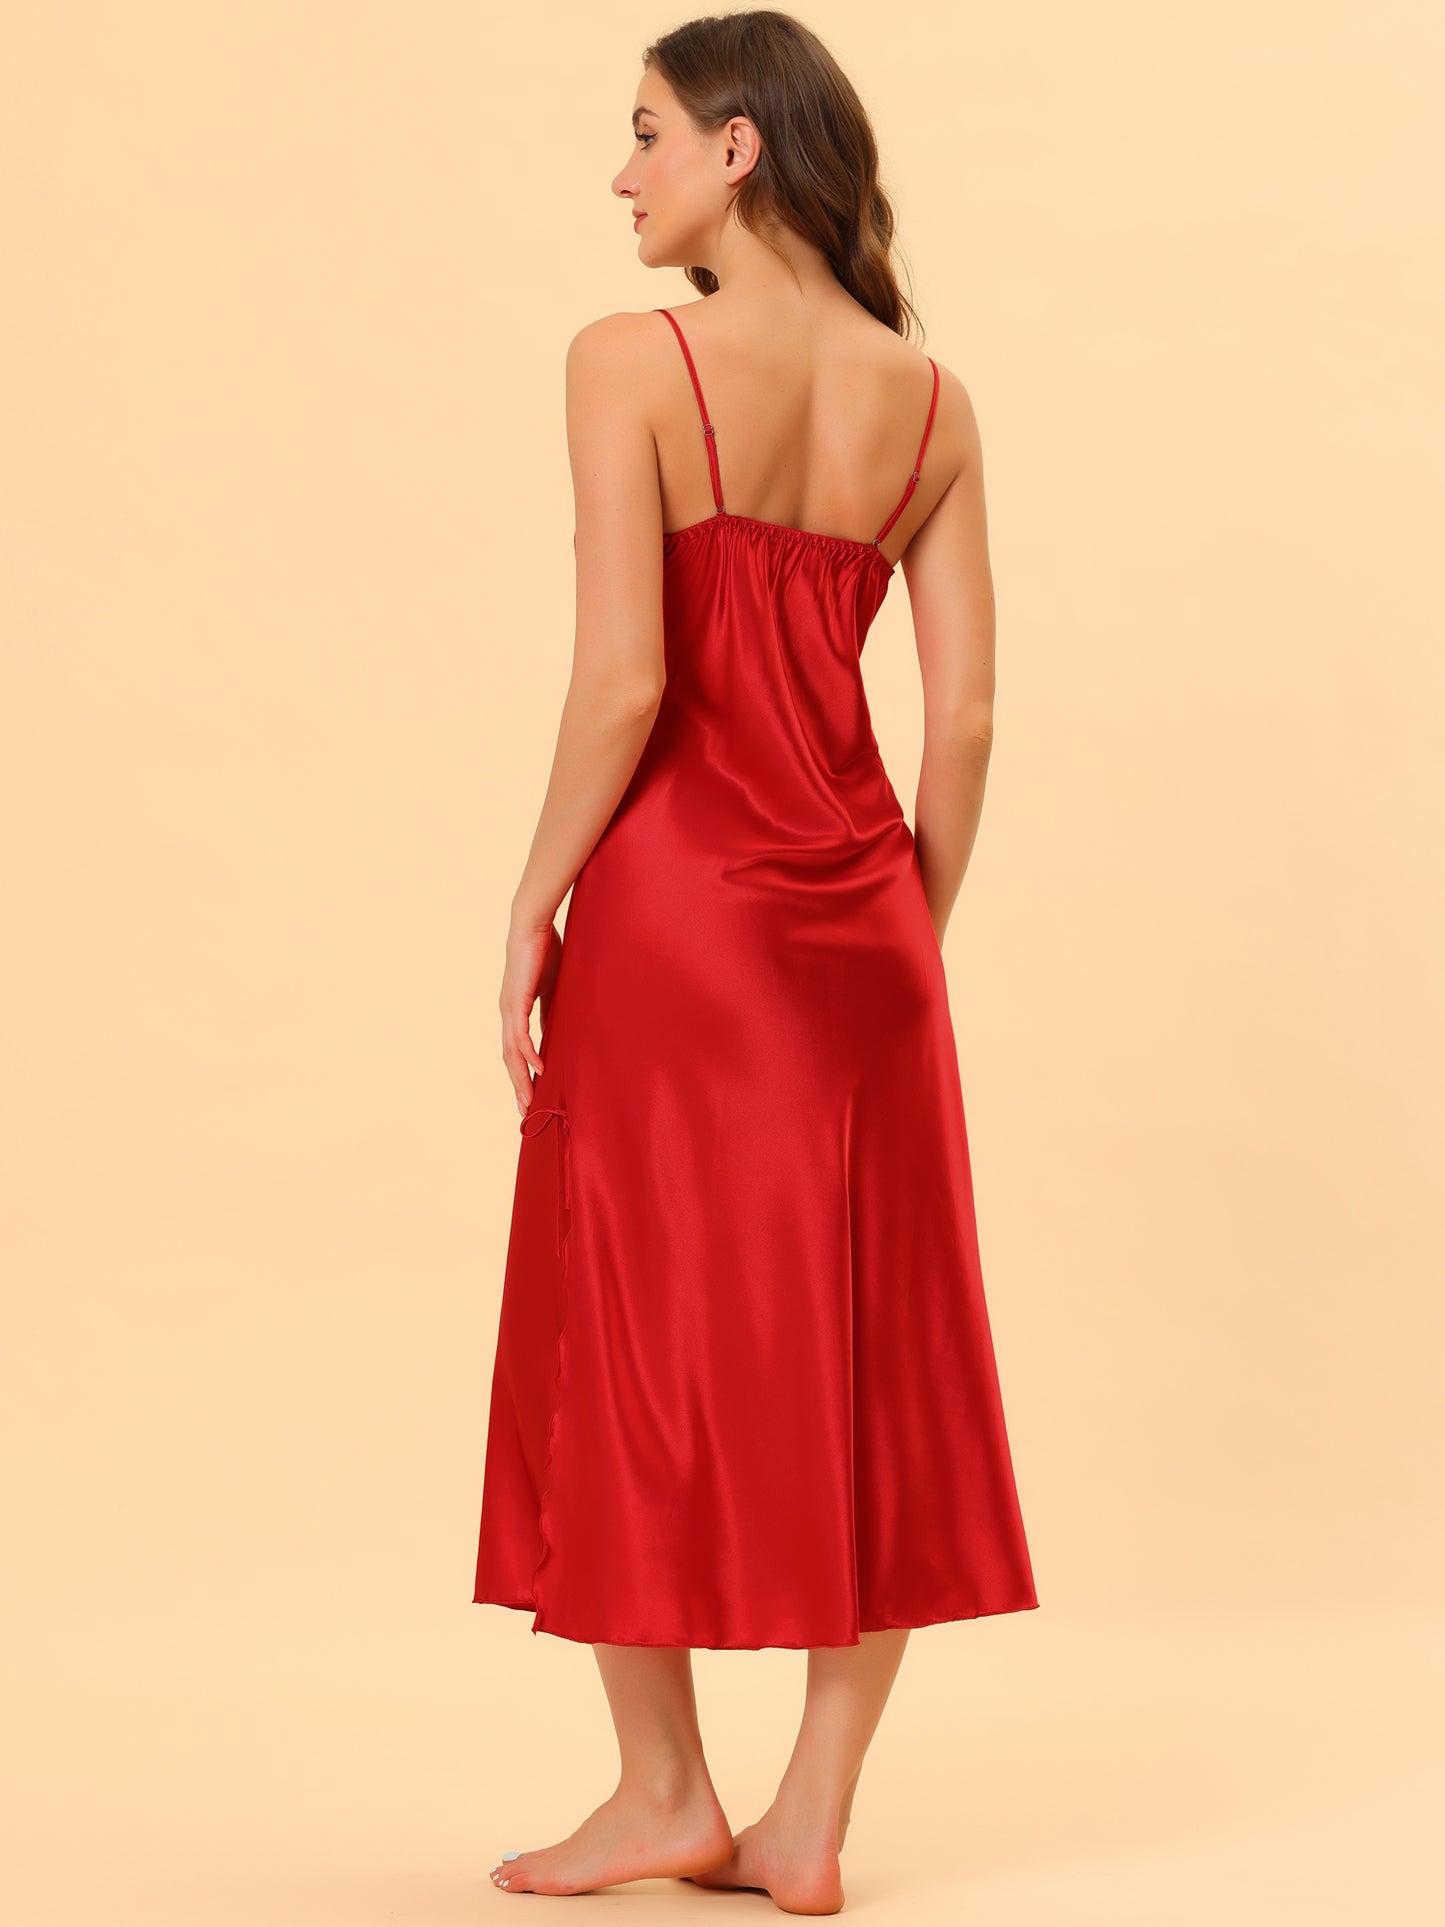 cheibear Satin Slip Dress Chemise Silky Lounge Camisole Maxi Nightgowns Red